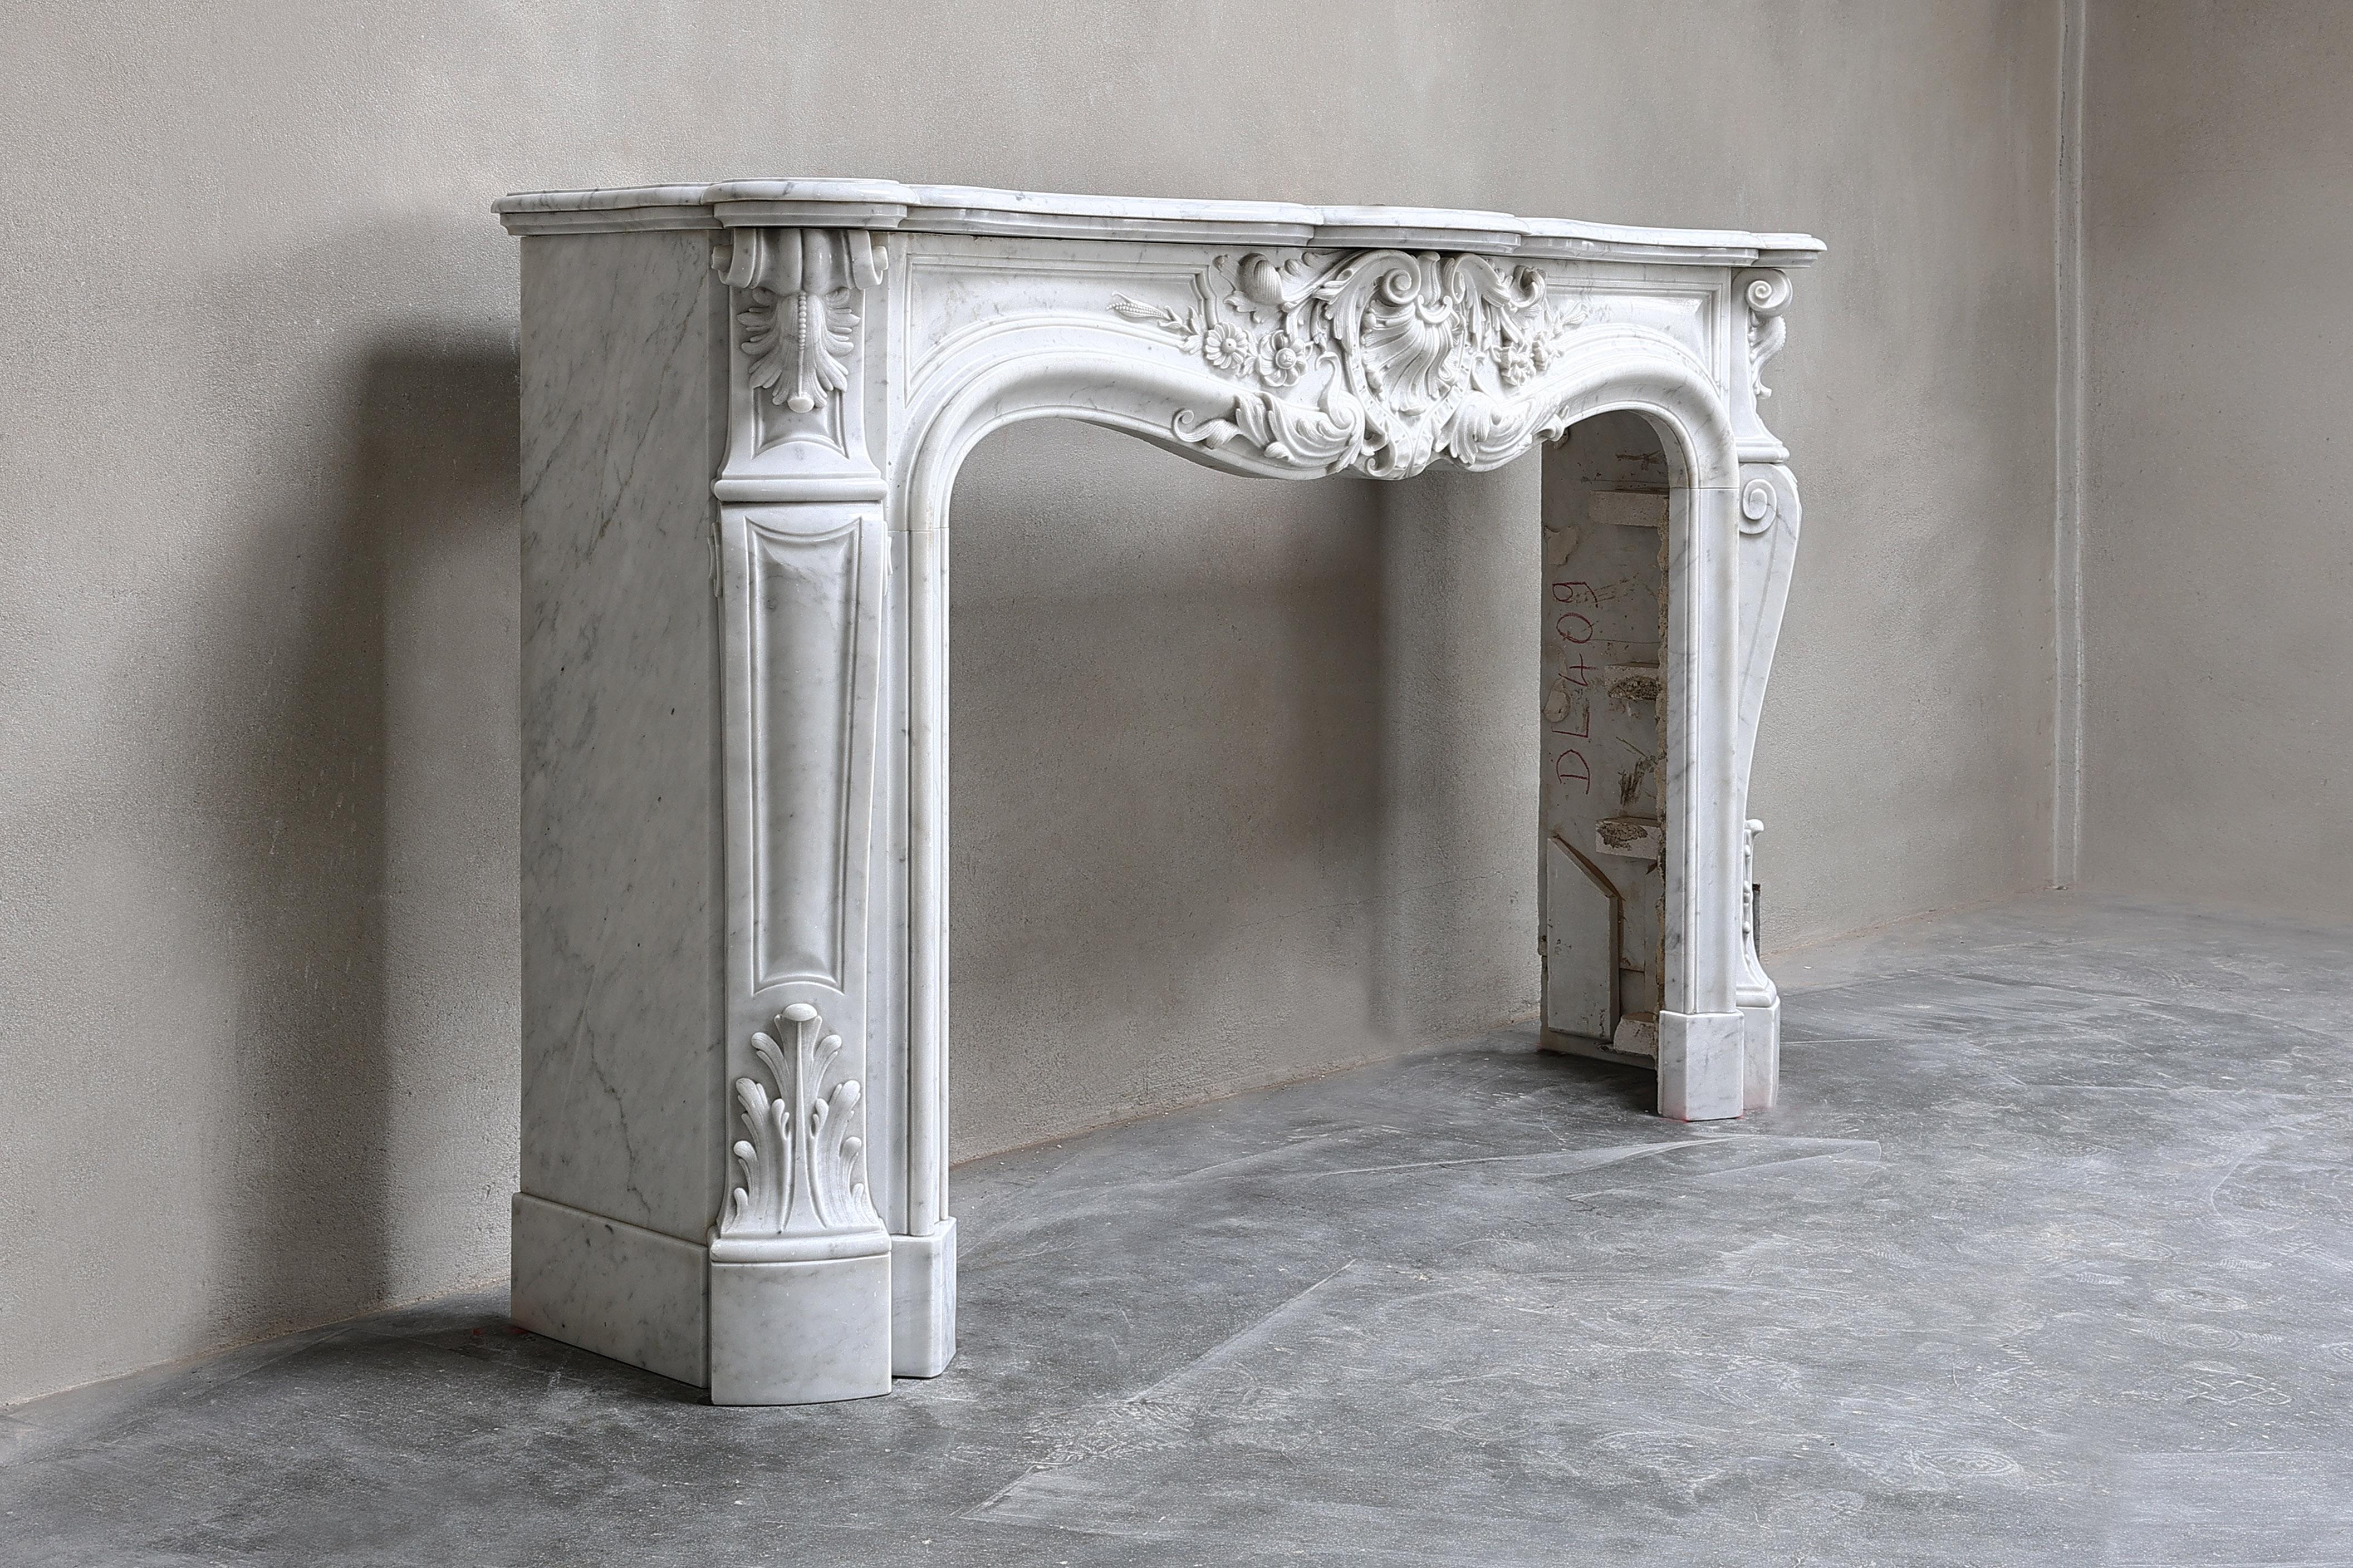 Beautiful exclusive antique fireplace made of Carrara marble from Italy! This 19th century fireplace is in the style of Louis XV and richly decorated with various ornaments in the front part and on the legs. A chic fireplace within our collection.